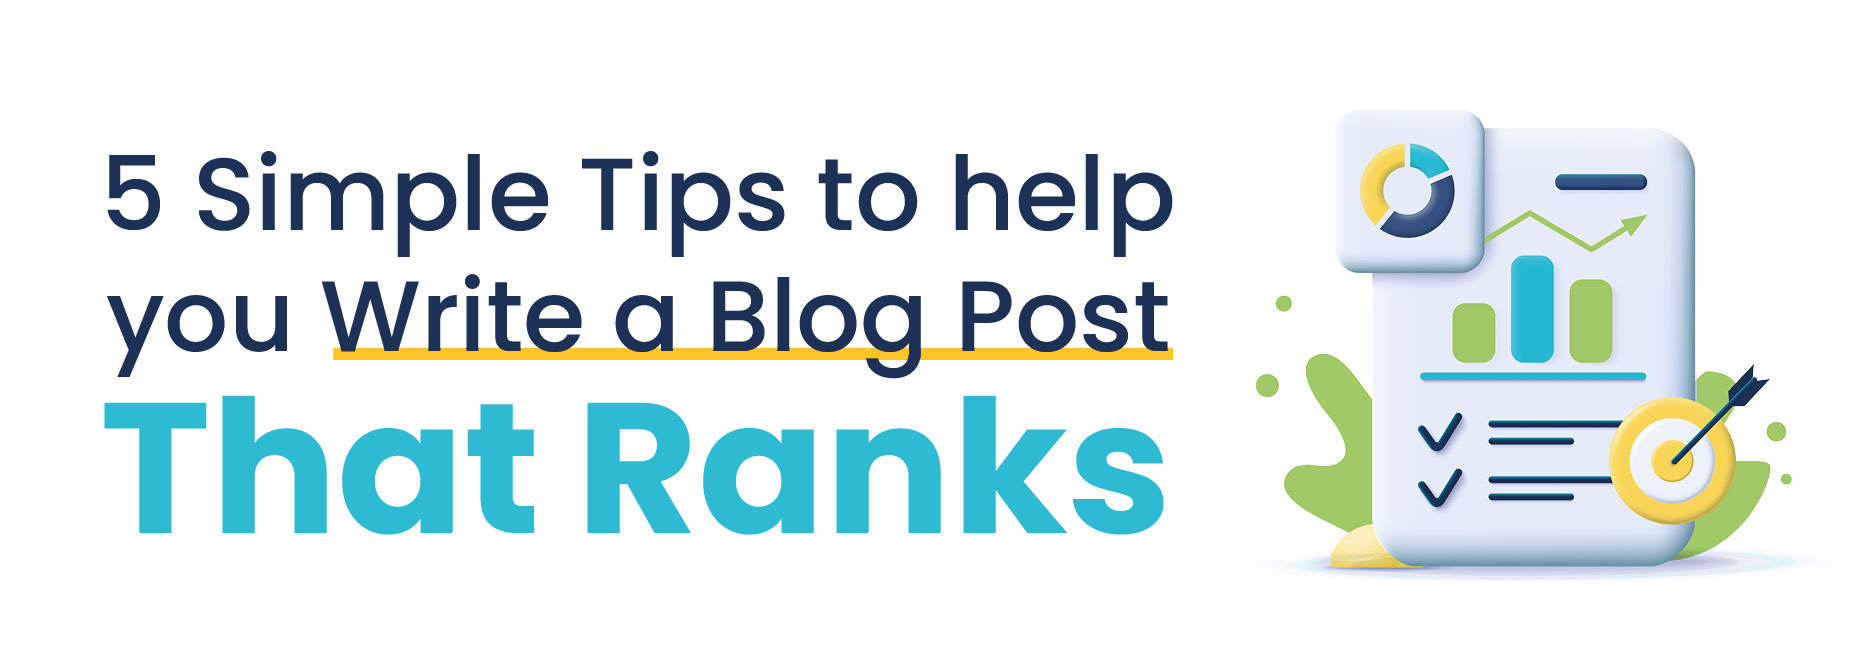 5 Simple Tips to Help You Write a Blog Post That Ranks